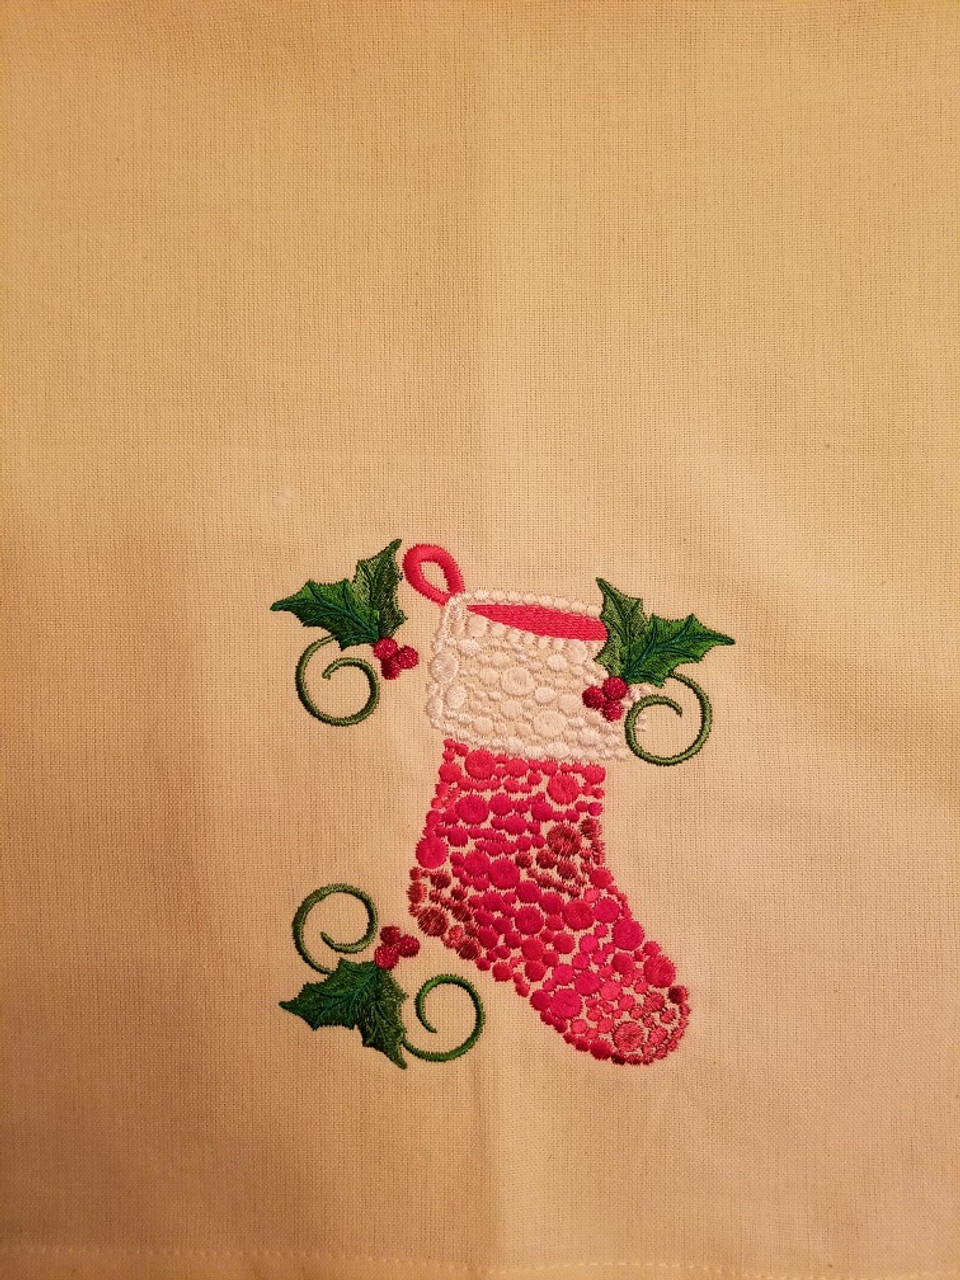 Stocking - Kitchen Towel - 20" x 28"
Embroidery on a cream colored towel.
100% Cotton with loop, for optional hanging.
Machine washable in cool water and tumble dry at low temperature.
Minimal shrinkage.
Size: 20" x 28"